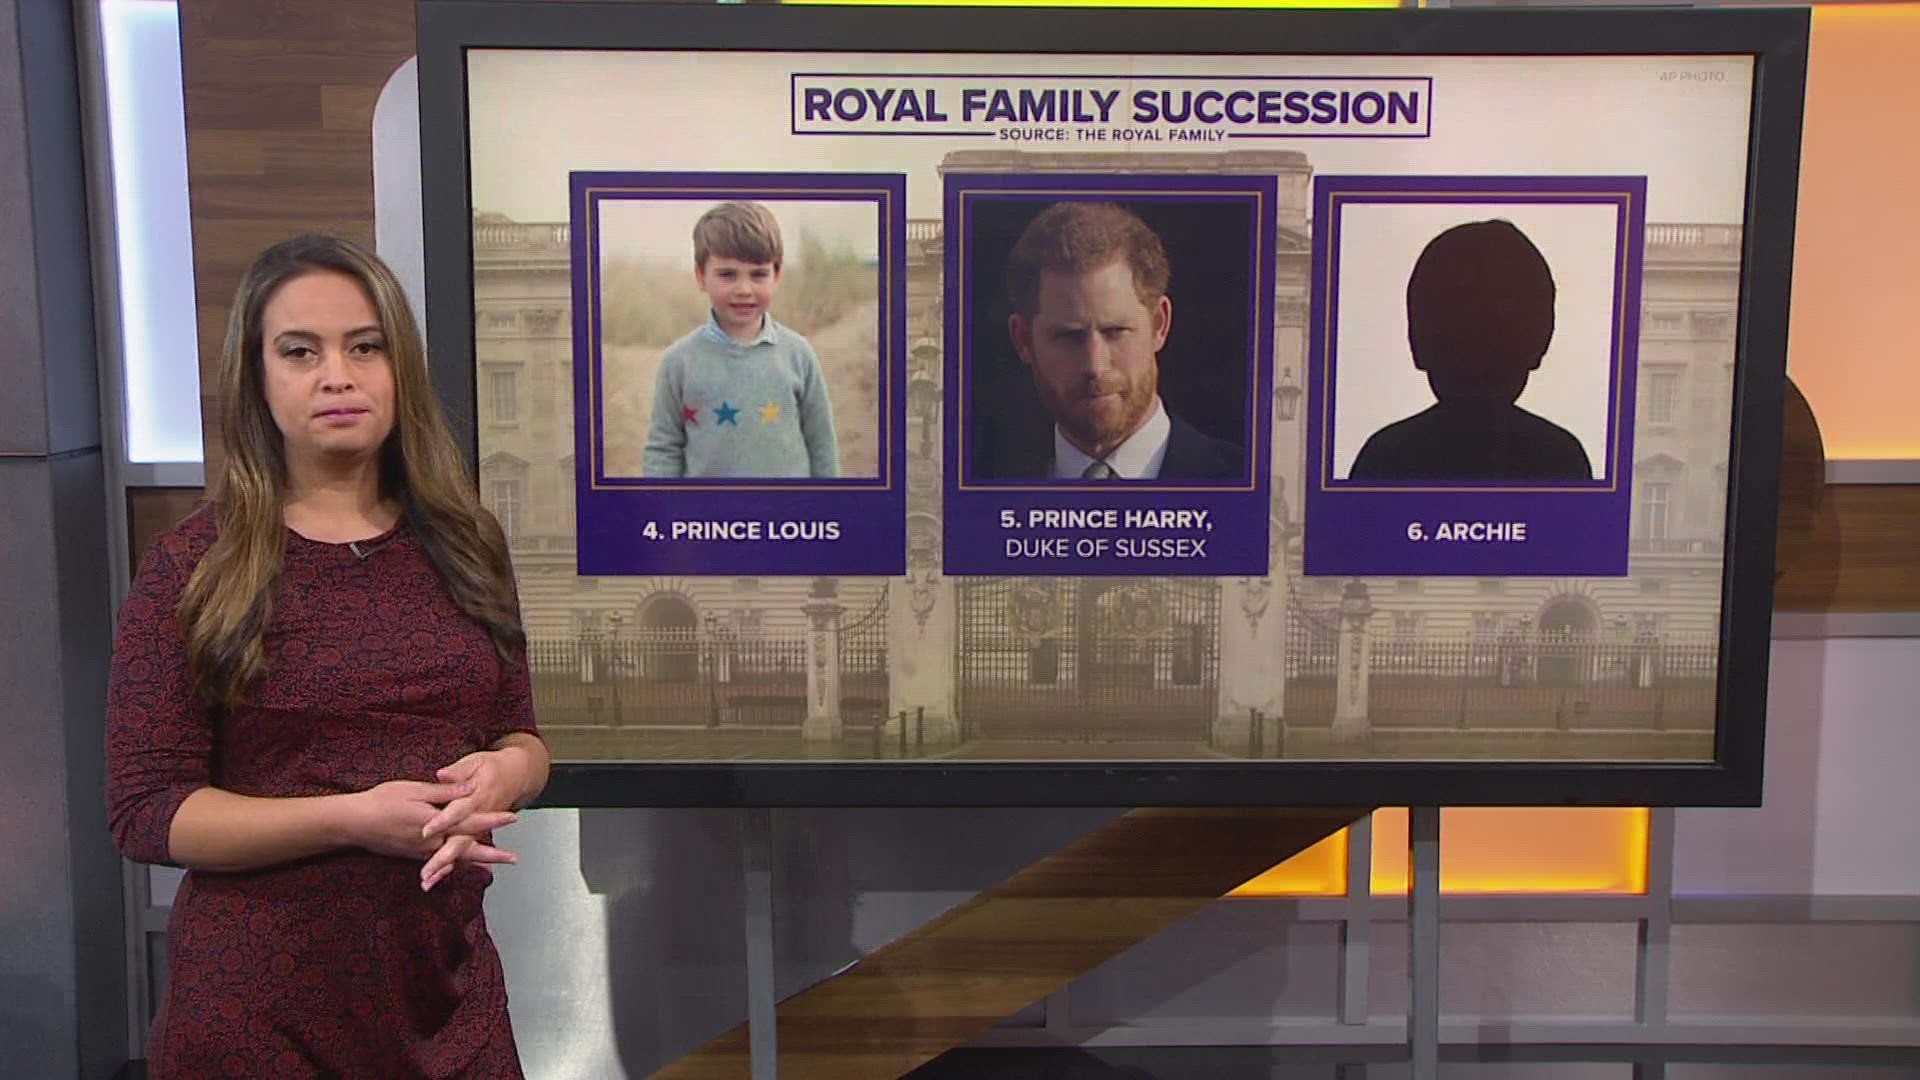 Here's the updated line of succession following the passing of Queen Elizabeth II.